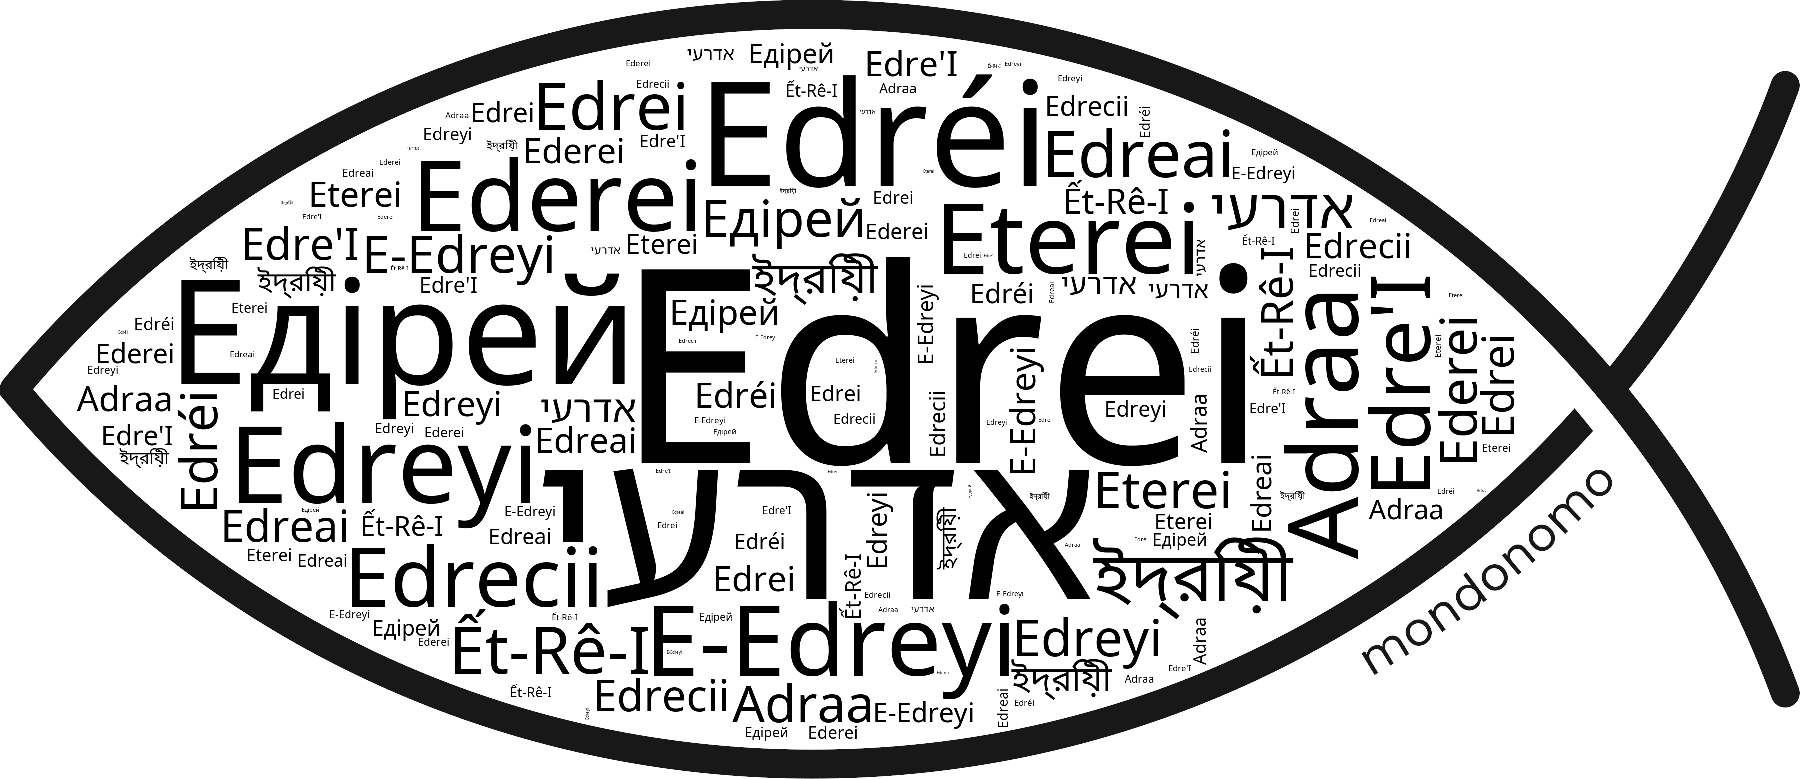 Name Edrei in the world's Bibles